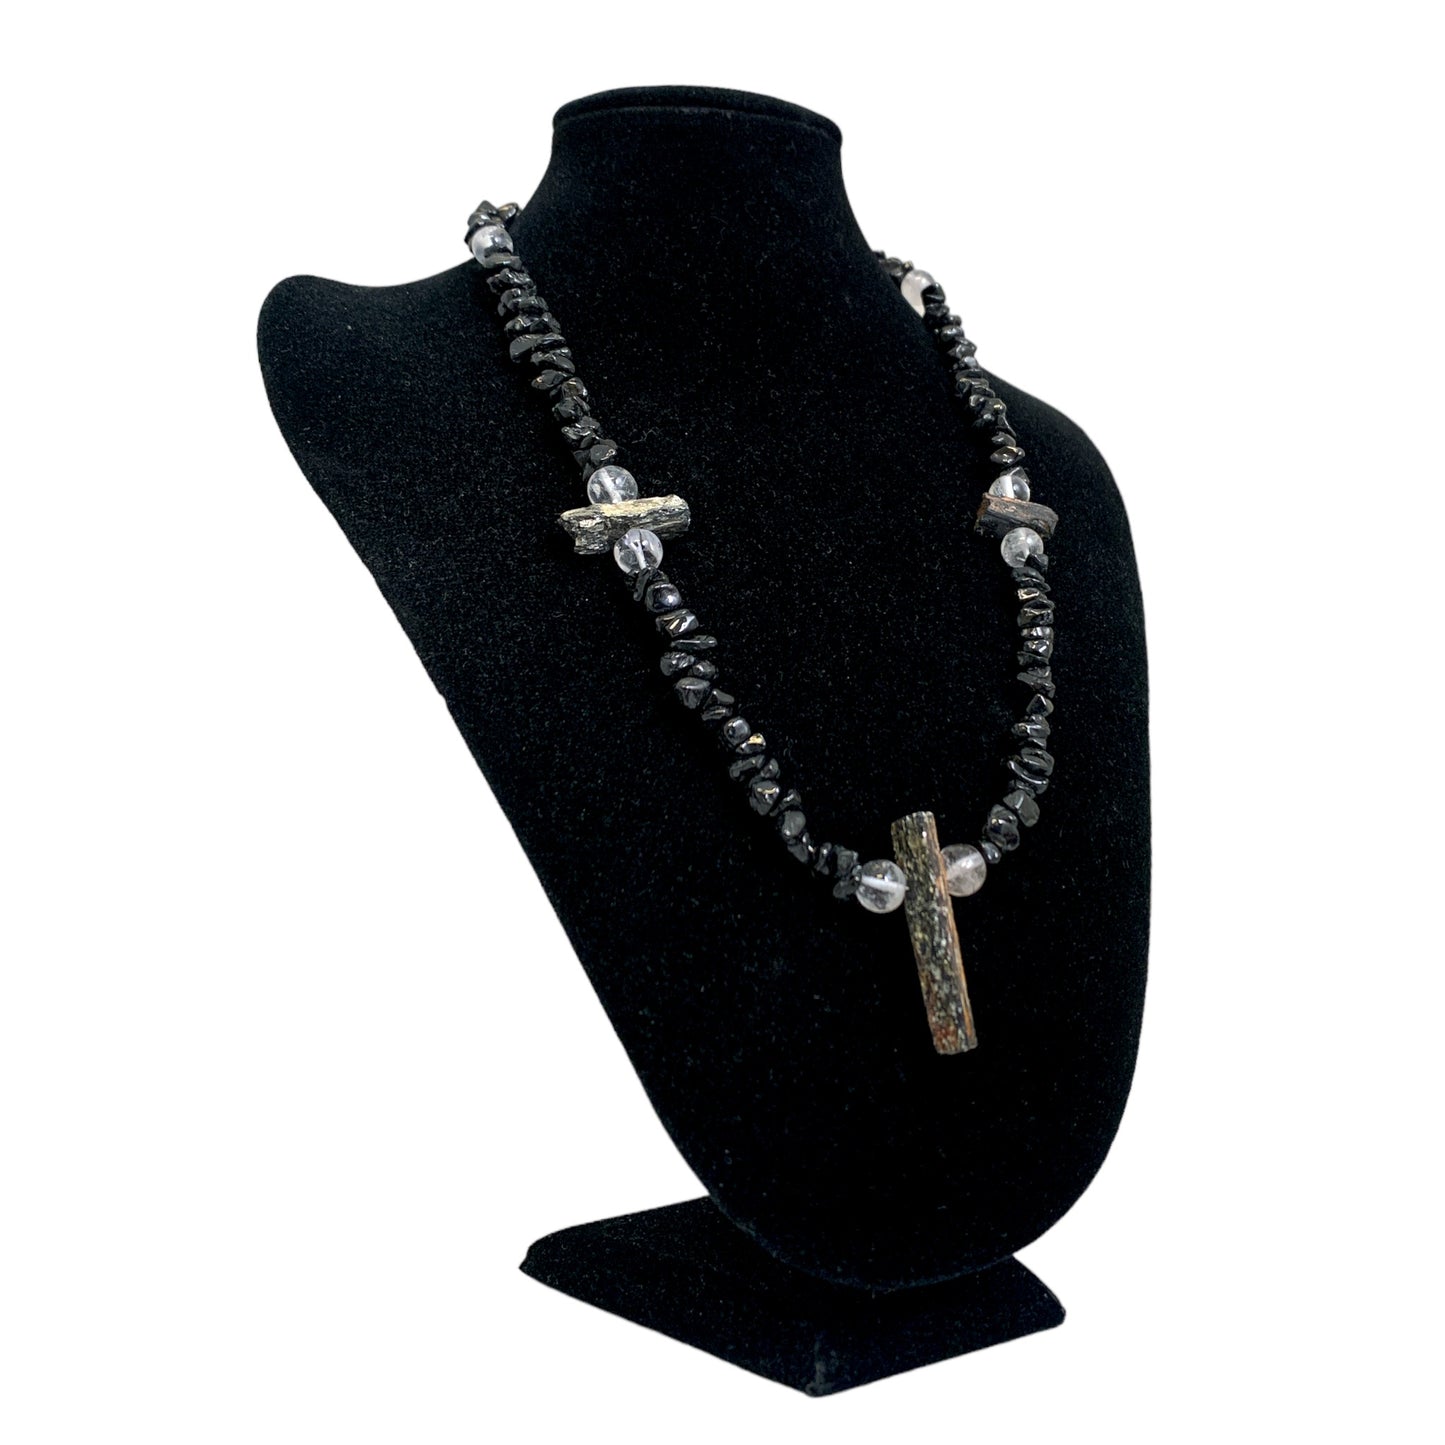 I Am Protected Power Necklace - Black Tourmaline Chips & Raw with Clear Quartz 7mm Beads - NEW1021